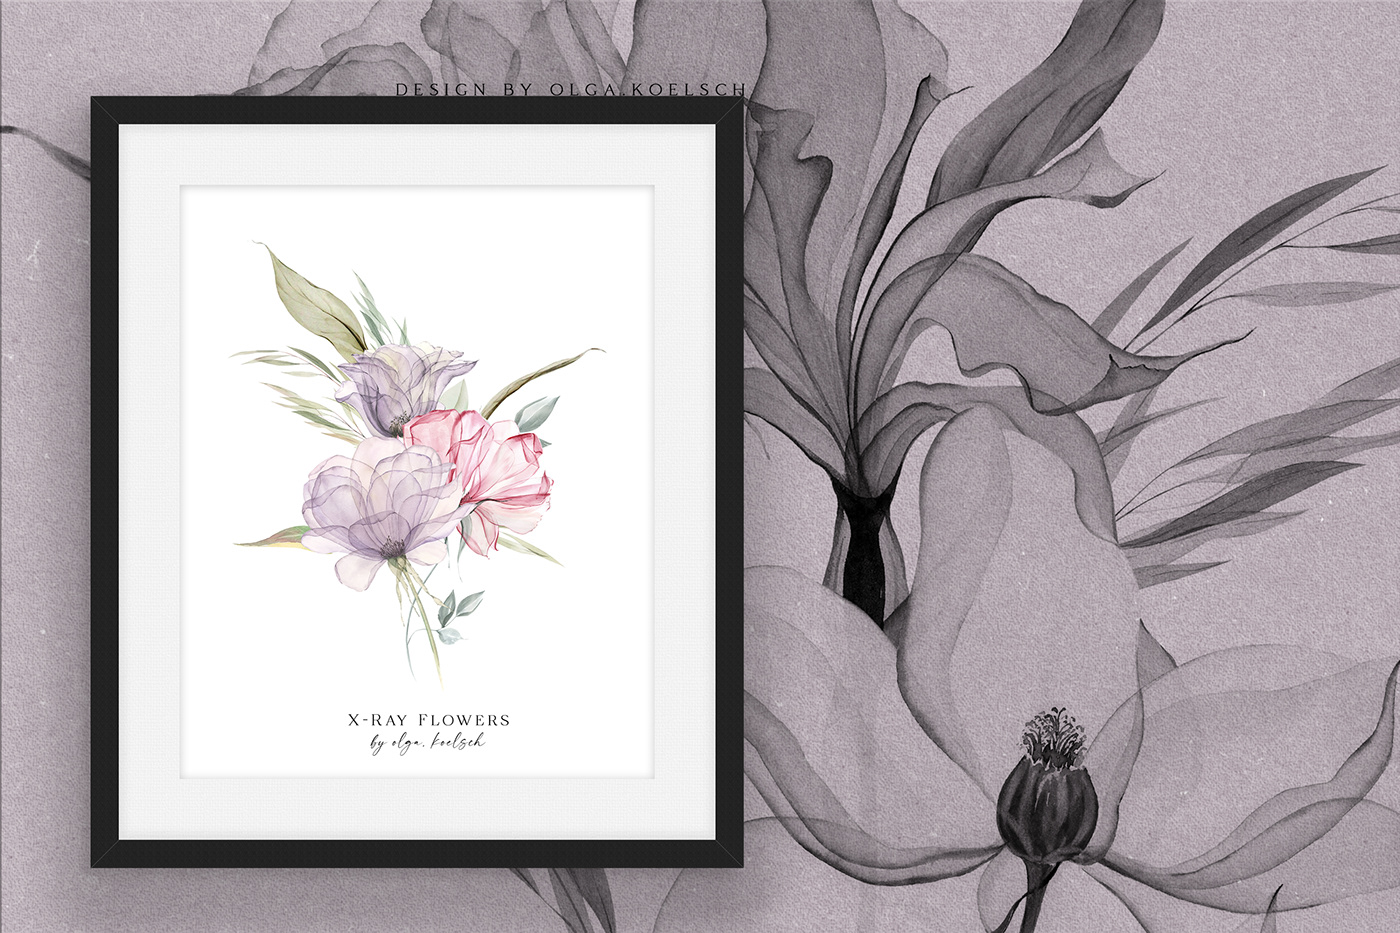 Watercolor X-ray flowers for wall art design